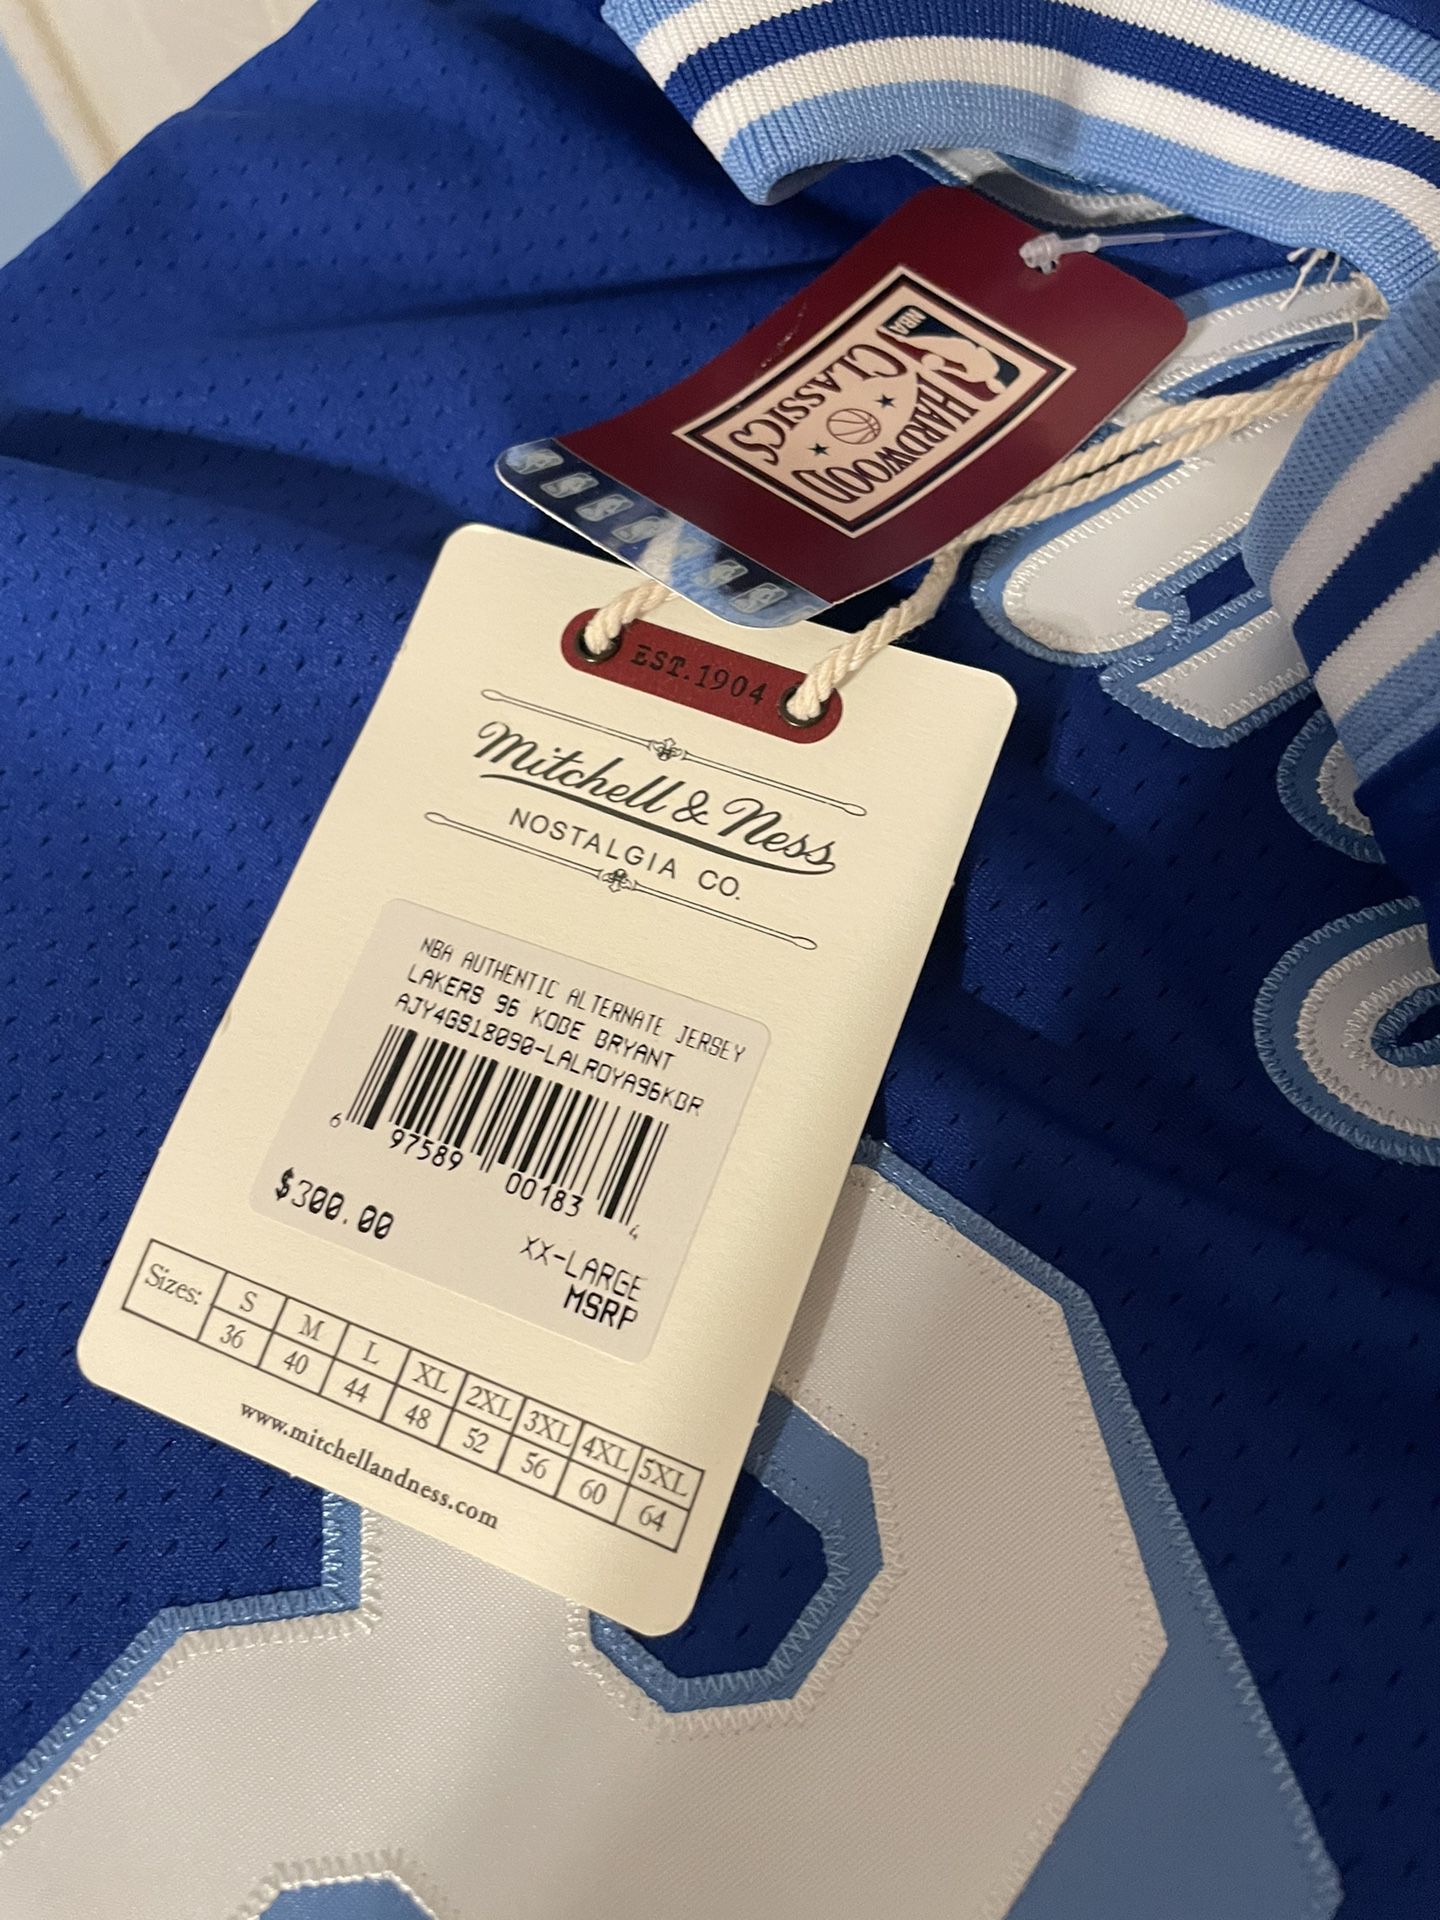 Lakers Kobe #8 Mitchell N Ness Mens Jersey for Sale in Bell Gardens, CA -  OfferUp